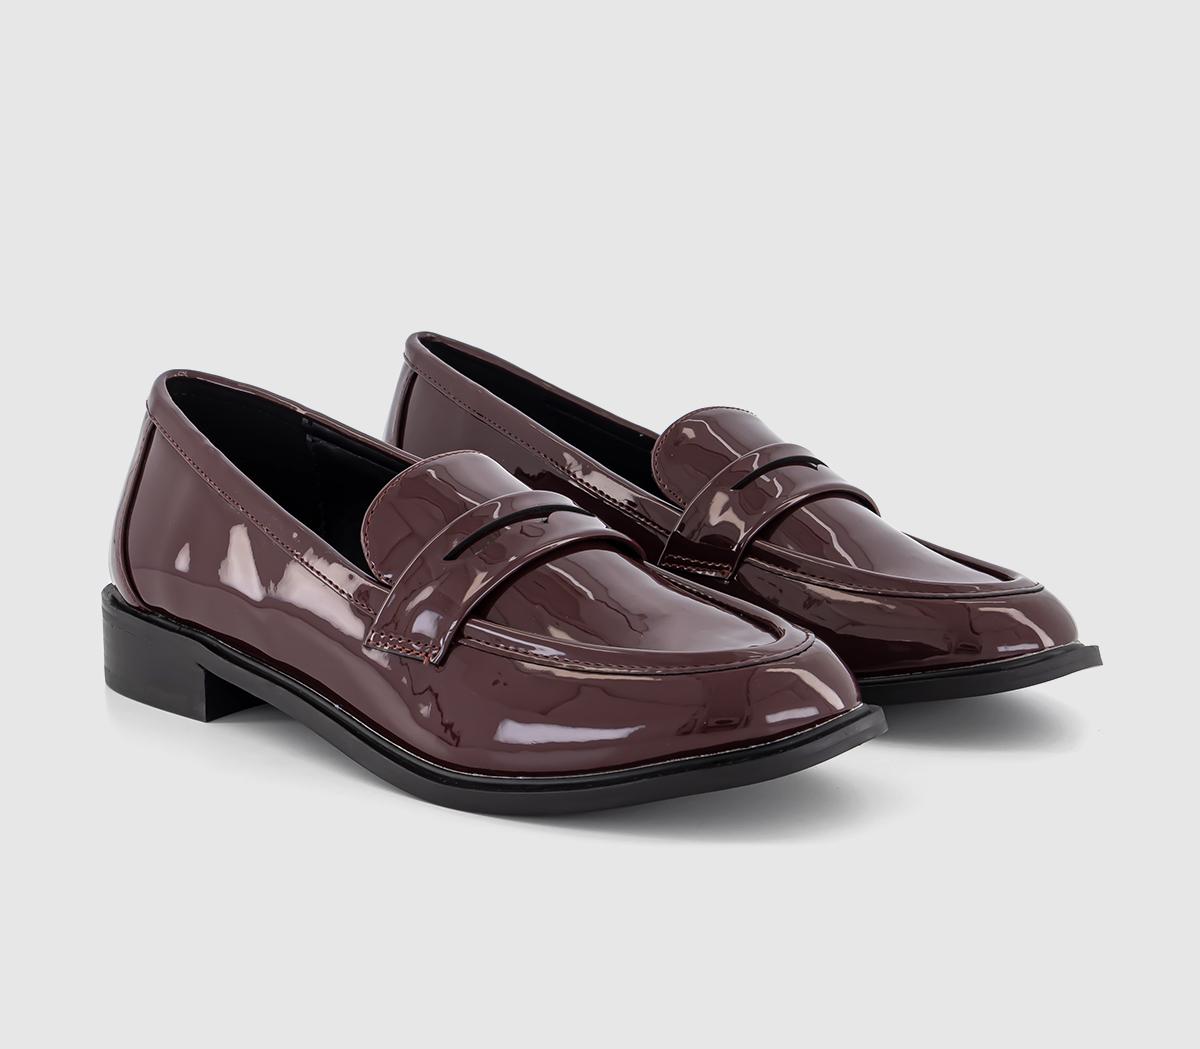 OFFICE Flaming Penny Loafers Burgundy Patent Purple, 5